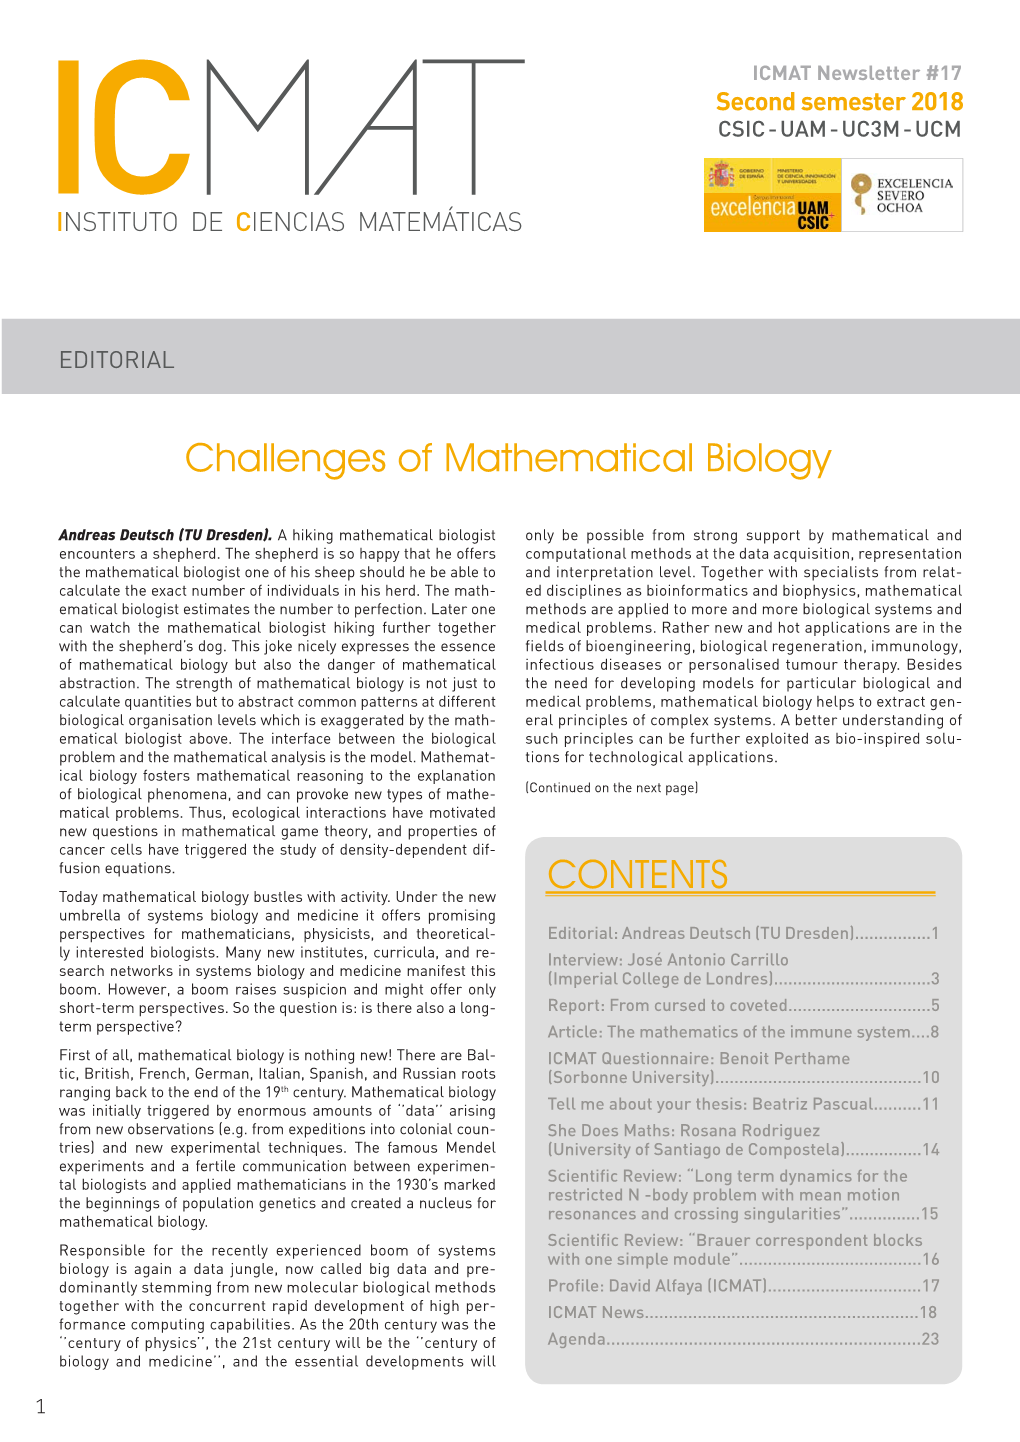 Challenges of Mathematical Biology CONTENTS